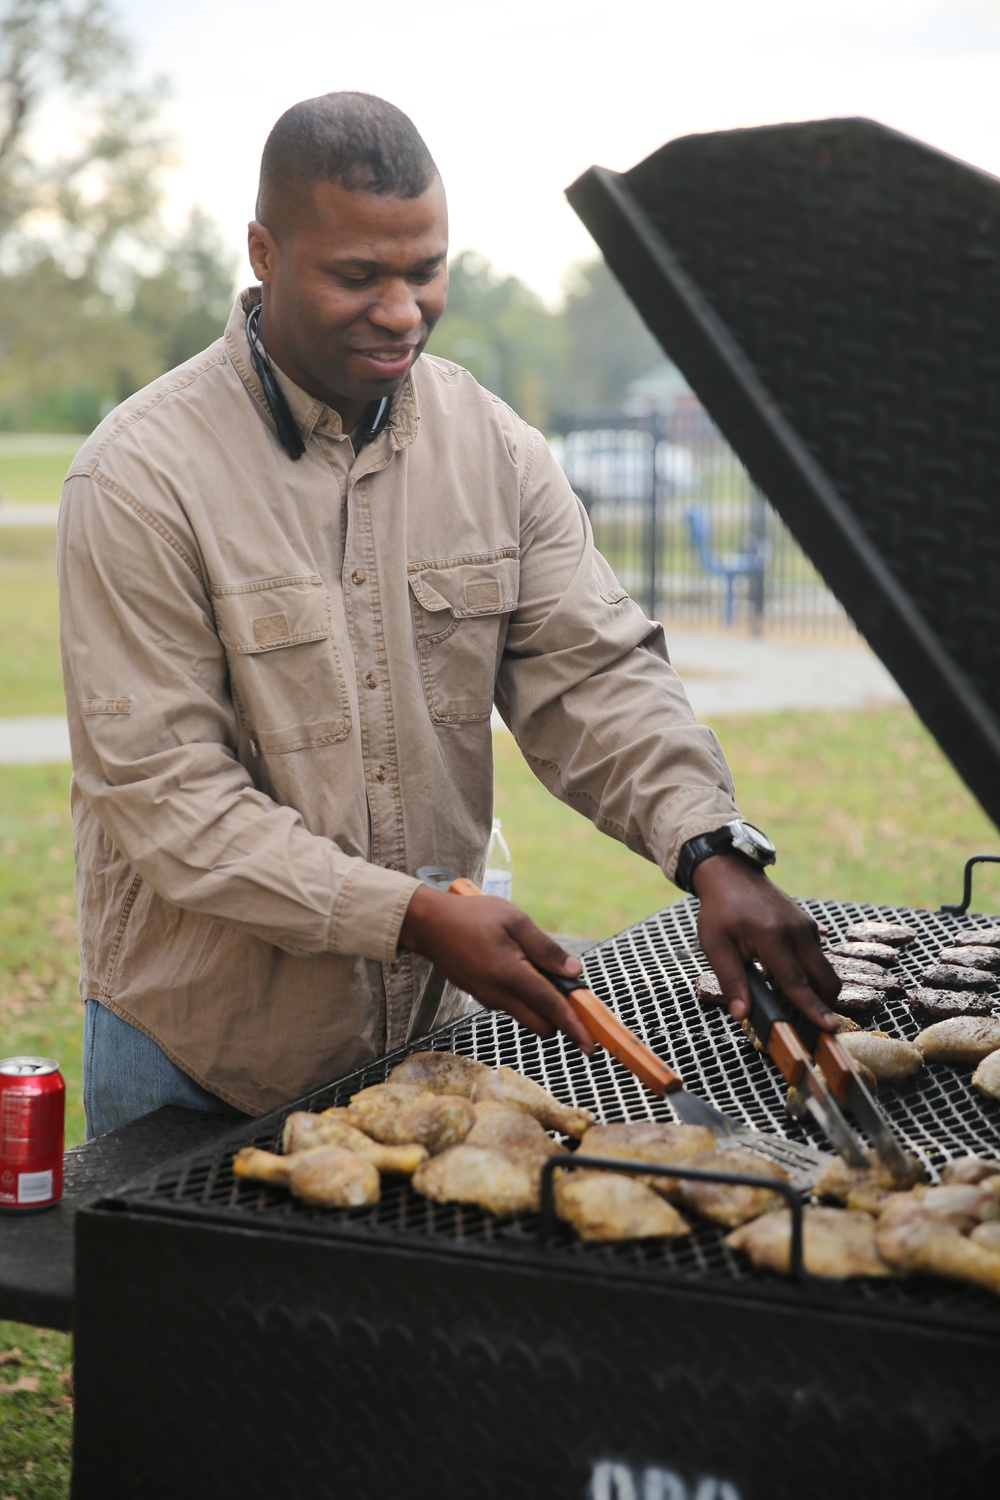 VMR-1 builds camaraderie with tailgate cookout